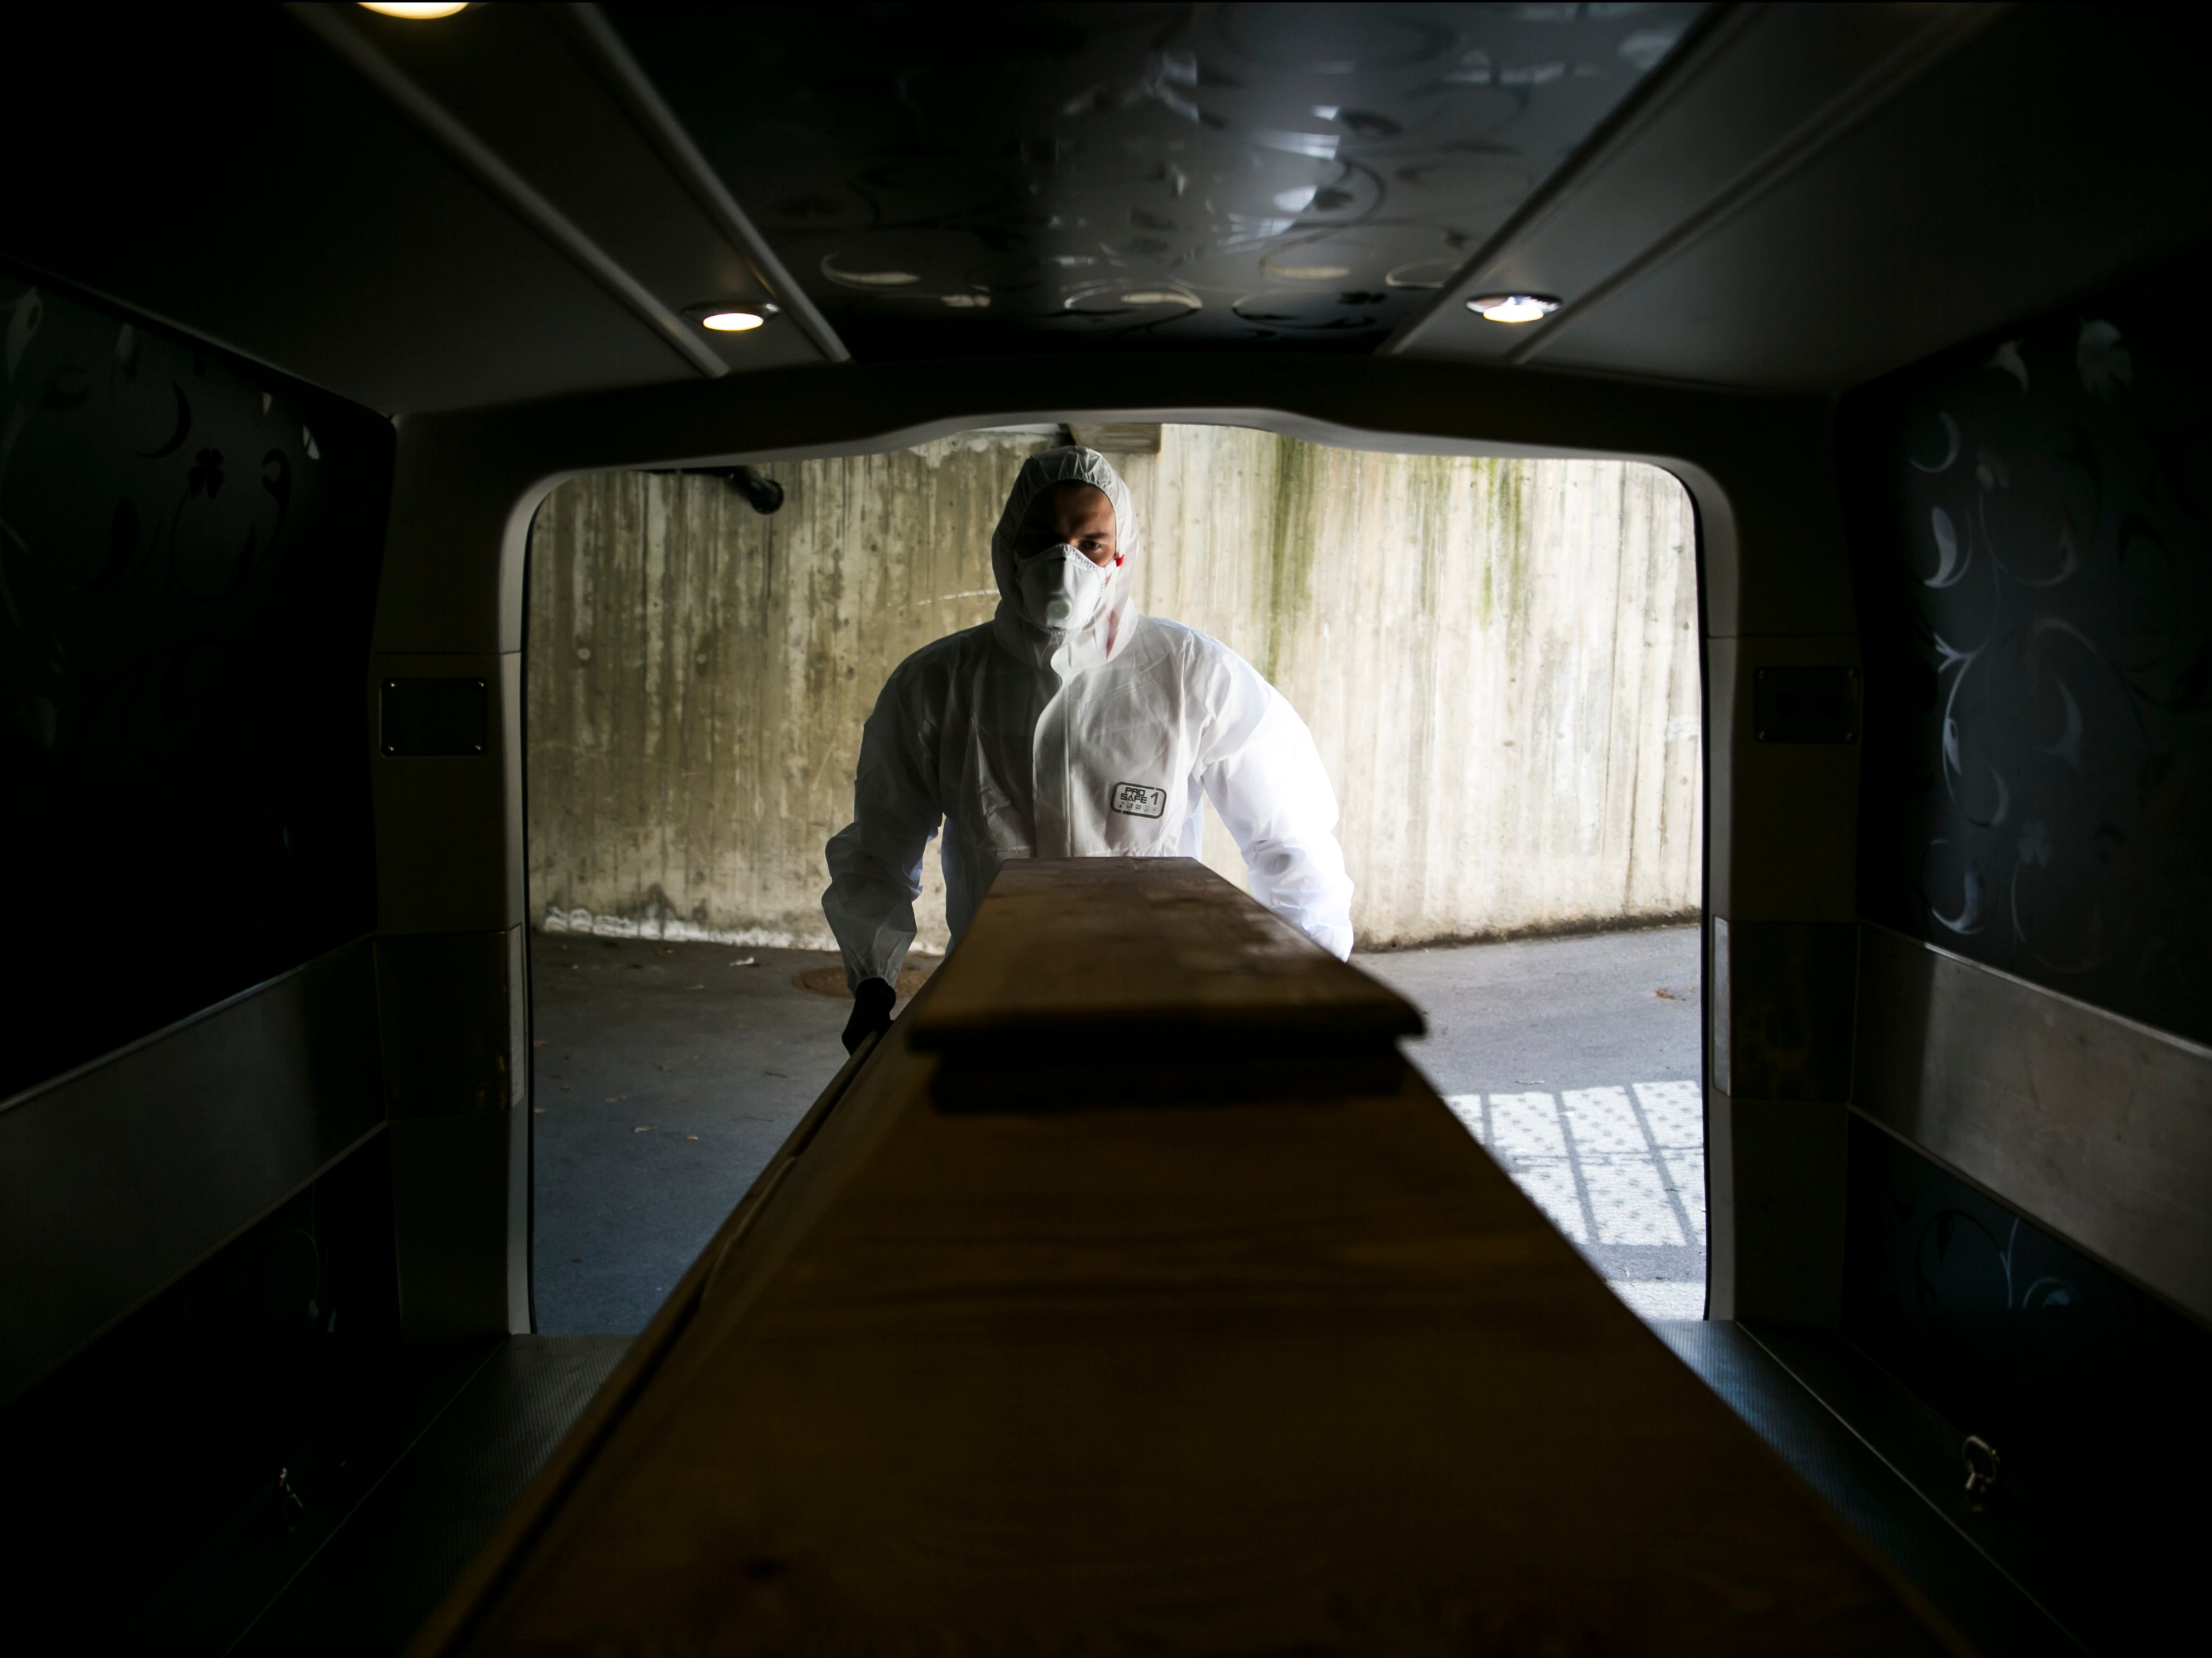 File image: An undertaker worker pushes a coffin carrying a deceased Covid-19 victim into a mortuary van at a morgue in Austria